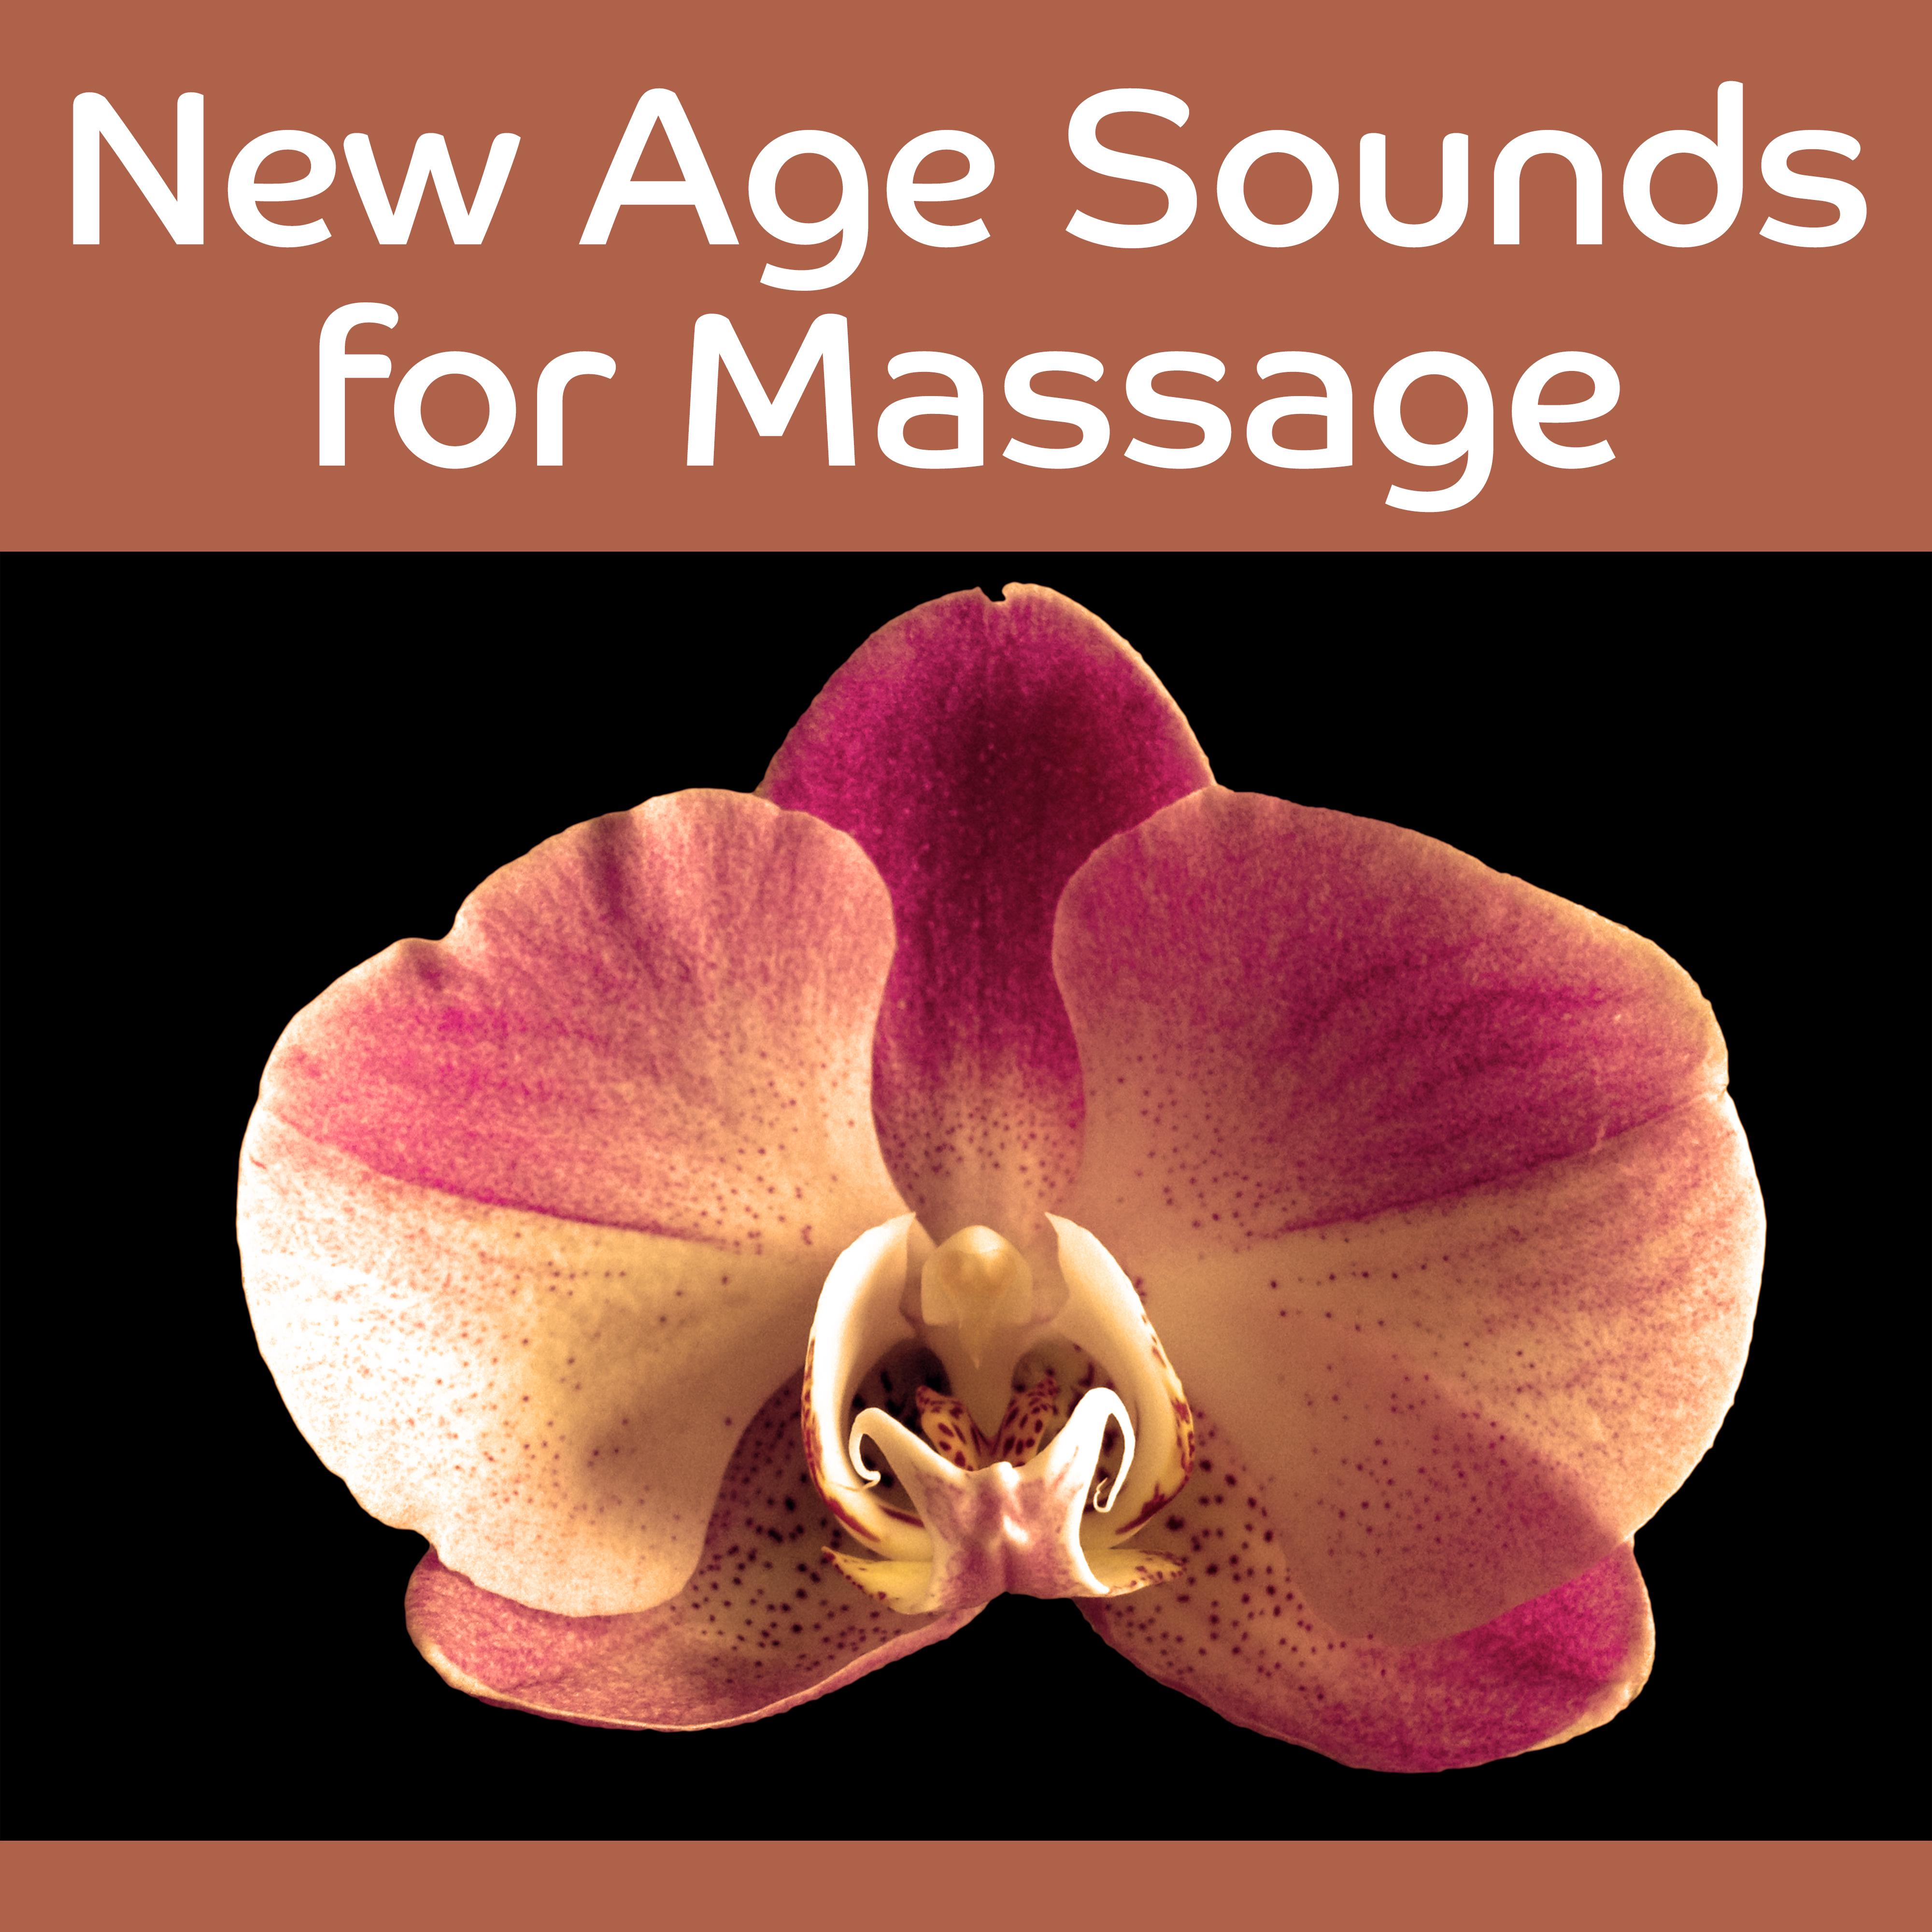 New Age Sounds for Massage  Relaxing Music, Nature Sounds, Calm Waves of Healing, Soft New Age Sounds